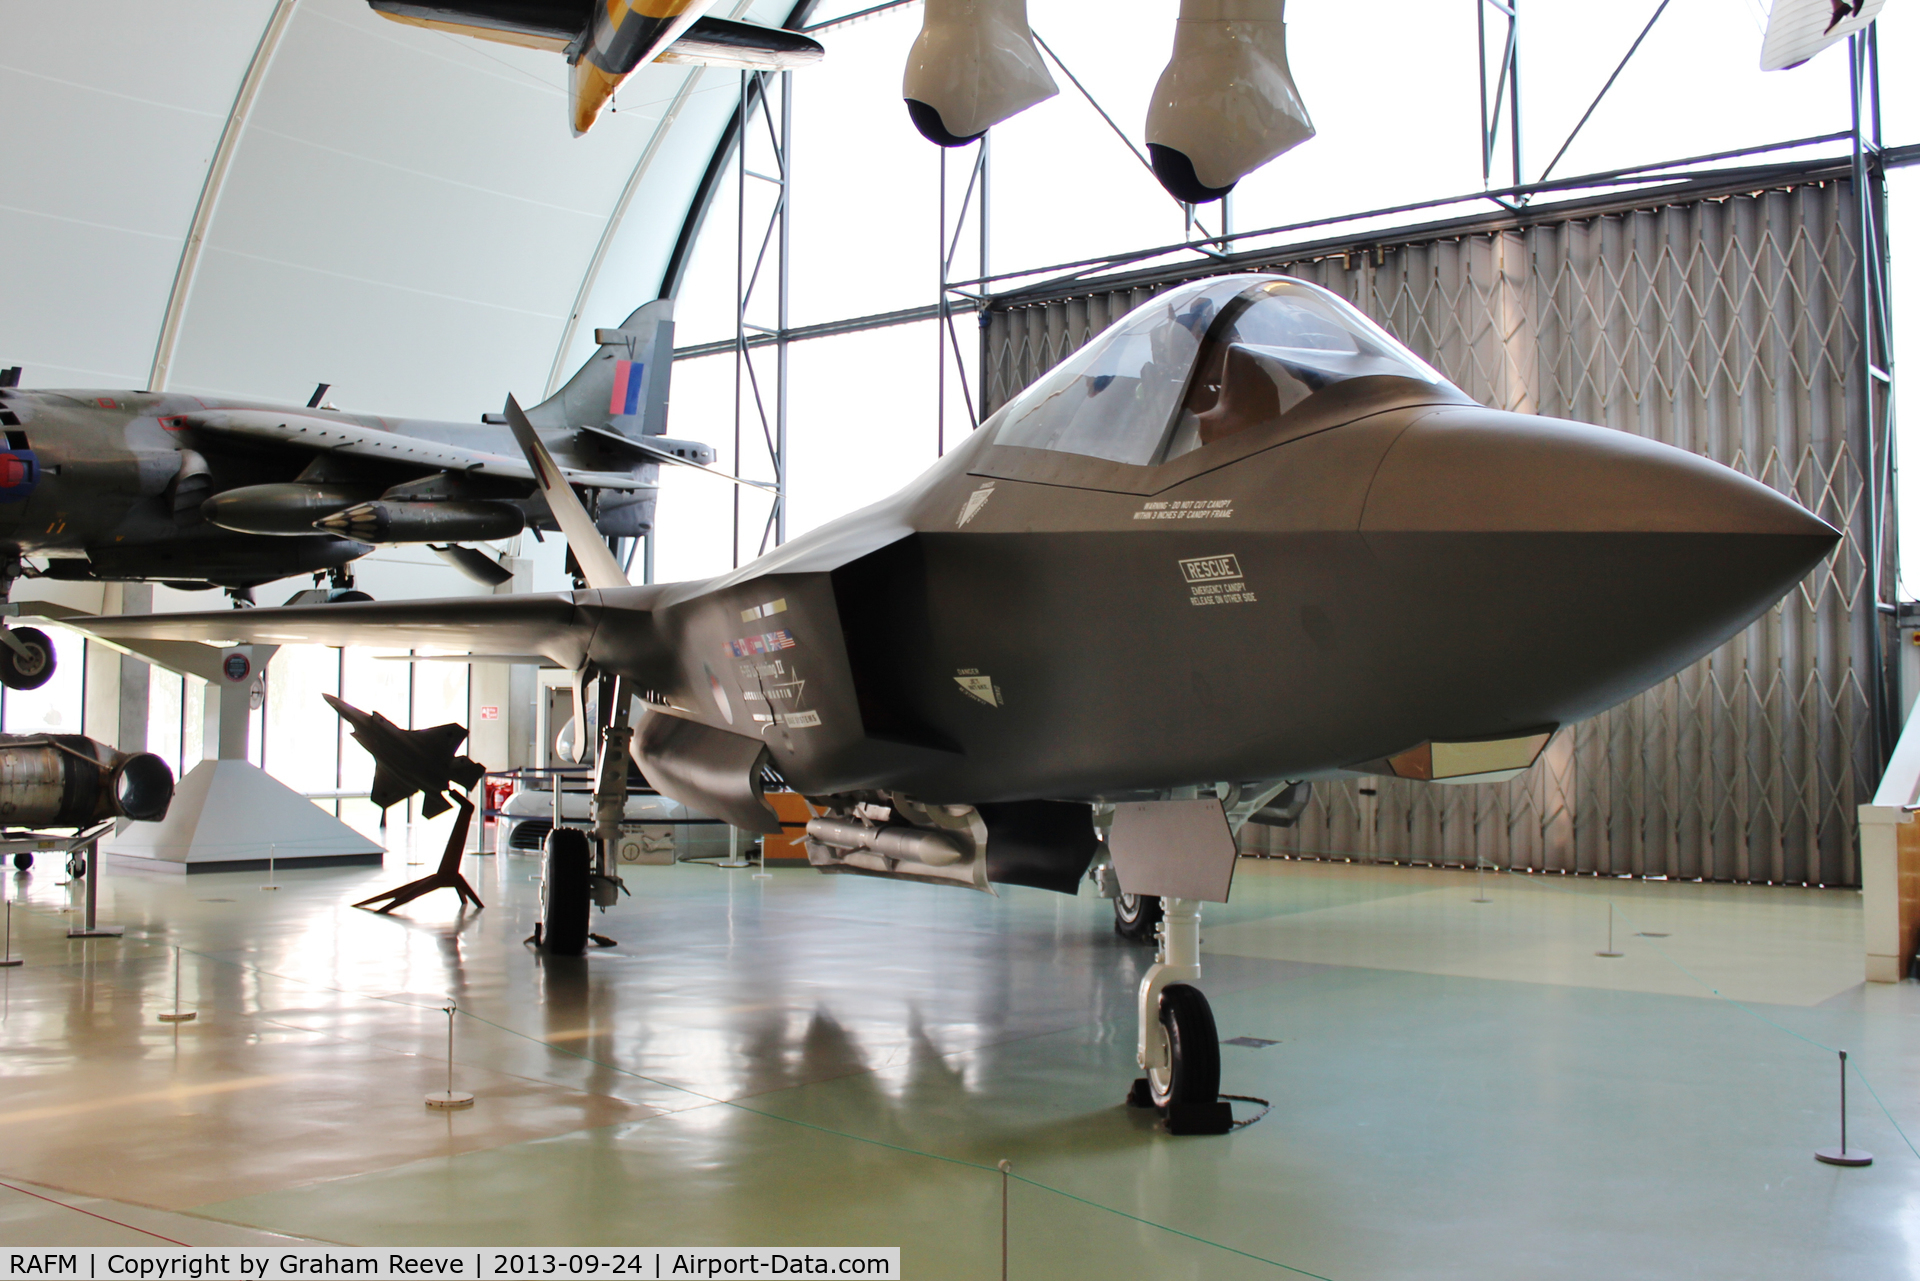 RAFM Airport - Lockheed Martin Joint Strike Fighter (JSF1) F-35 on display at the RAF Museum, Hendon in the Milestones of Flight Hall. The aircraft has no serial number (Mock Up) and is listed as ref X005-5749.